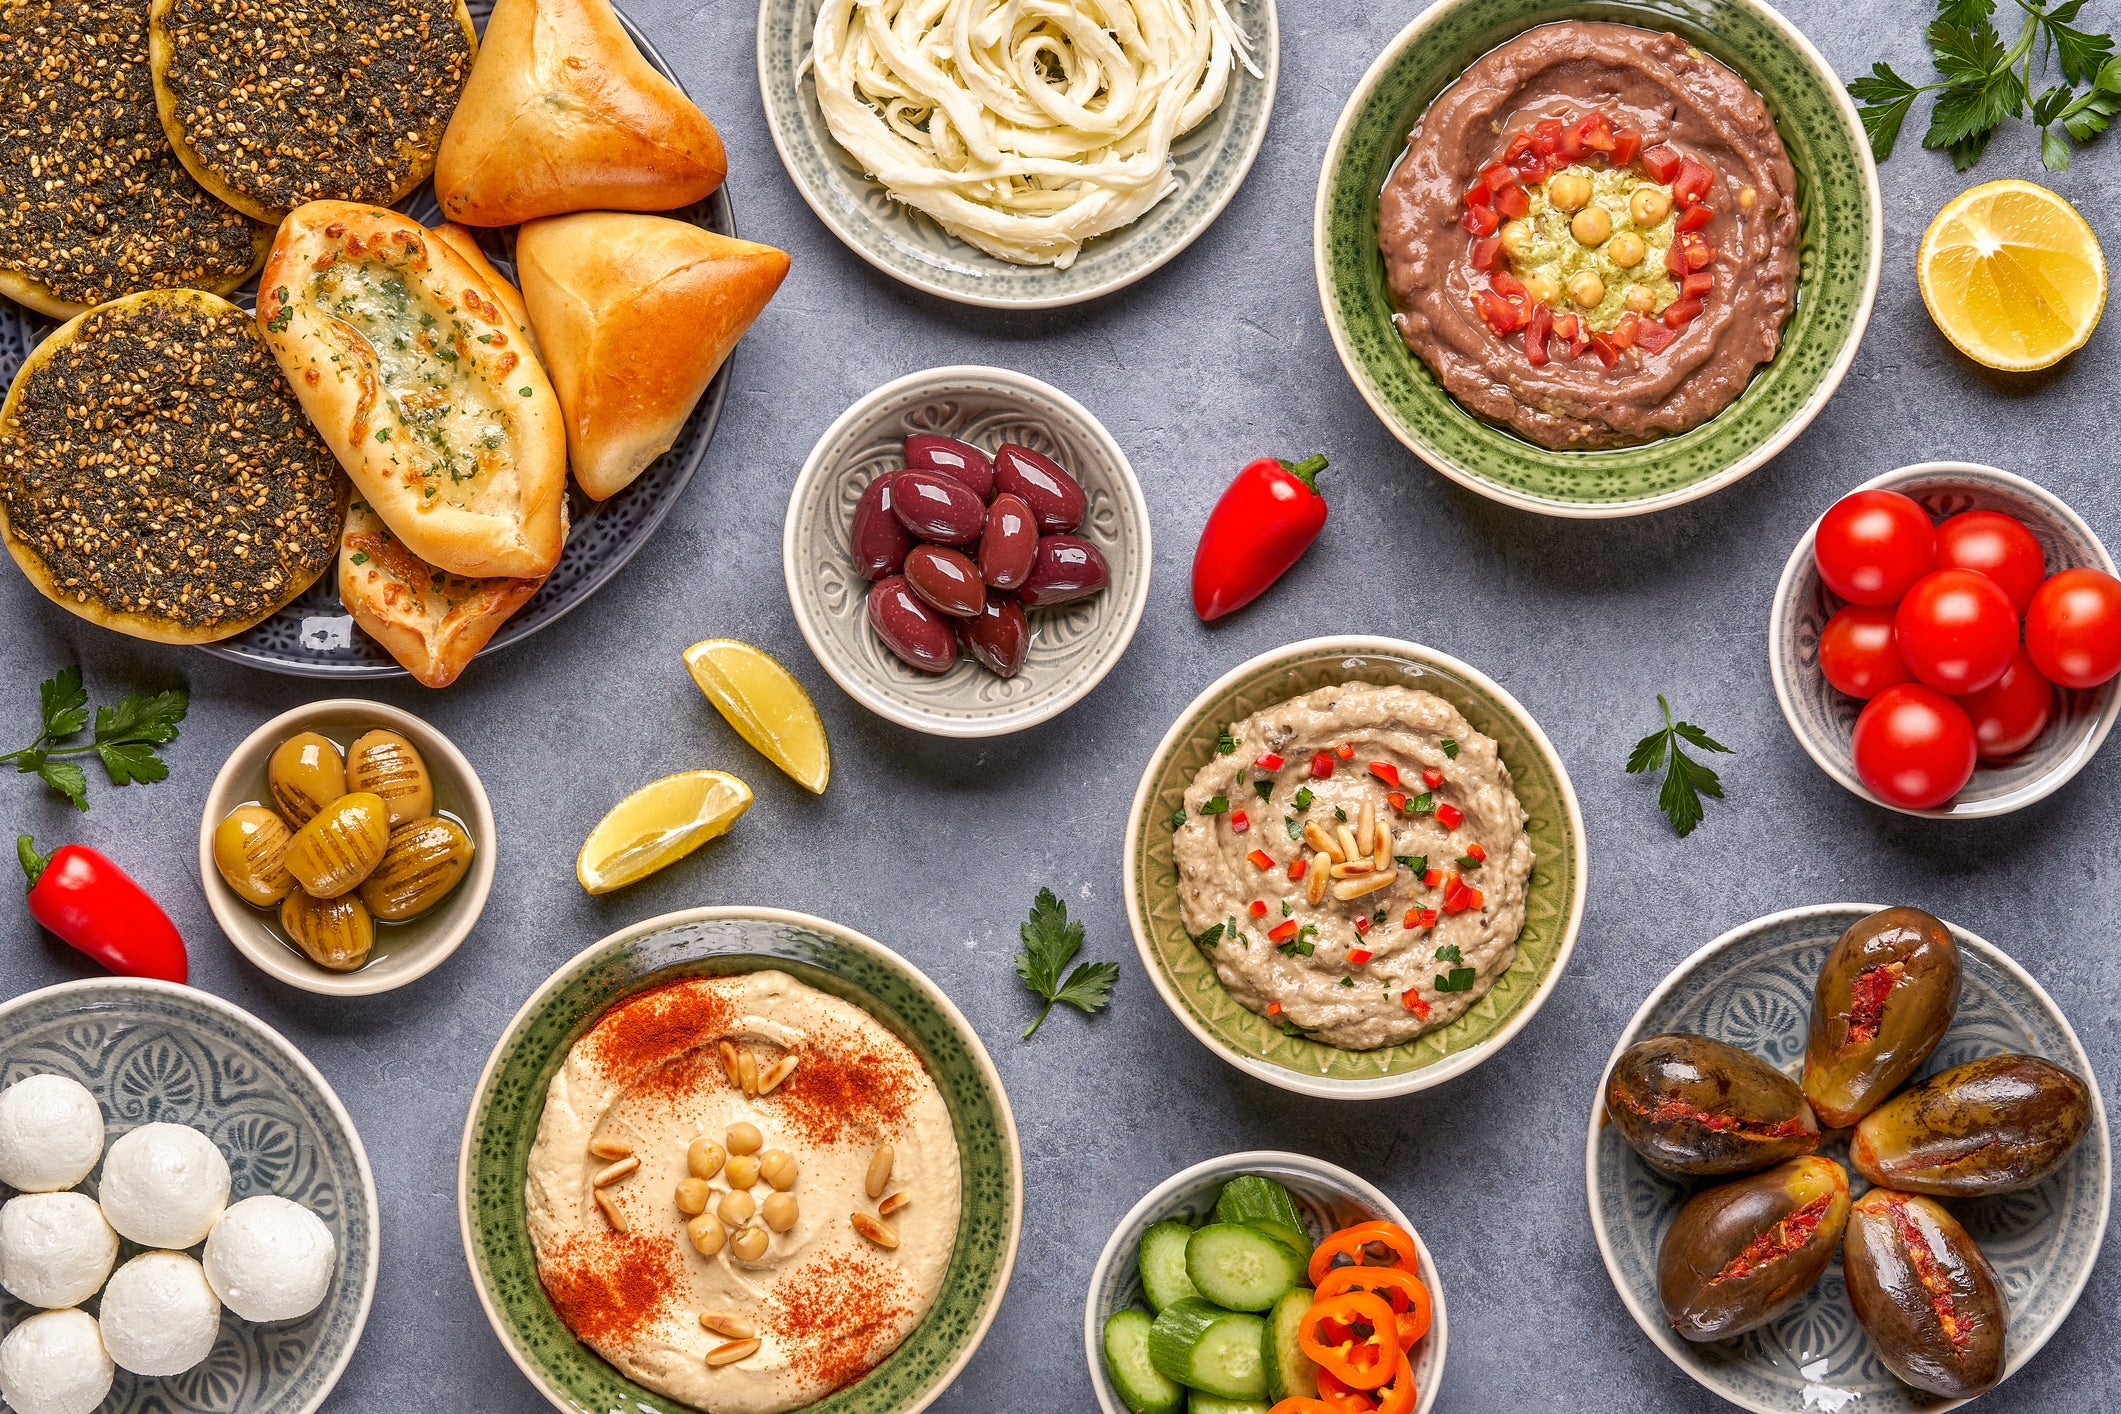 Top view of a middle eastern breakfast with dishes that include makdous, manakish, zaatar, hummus musabaha, olives and cheese